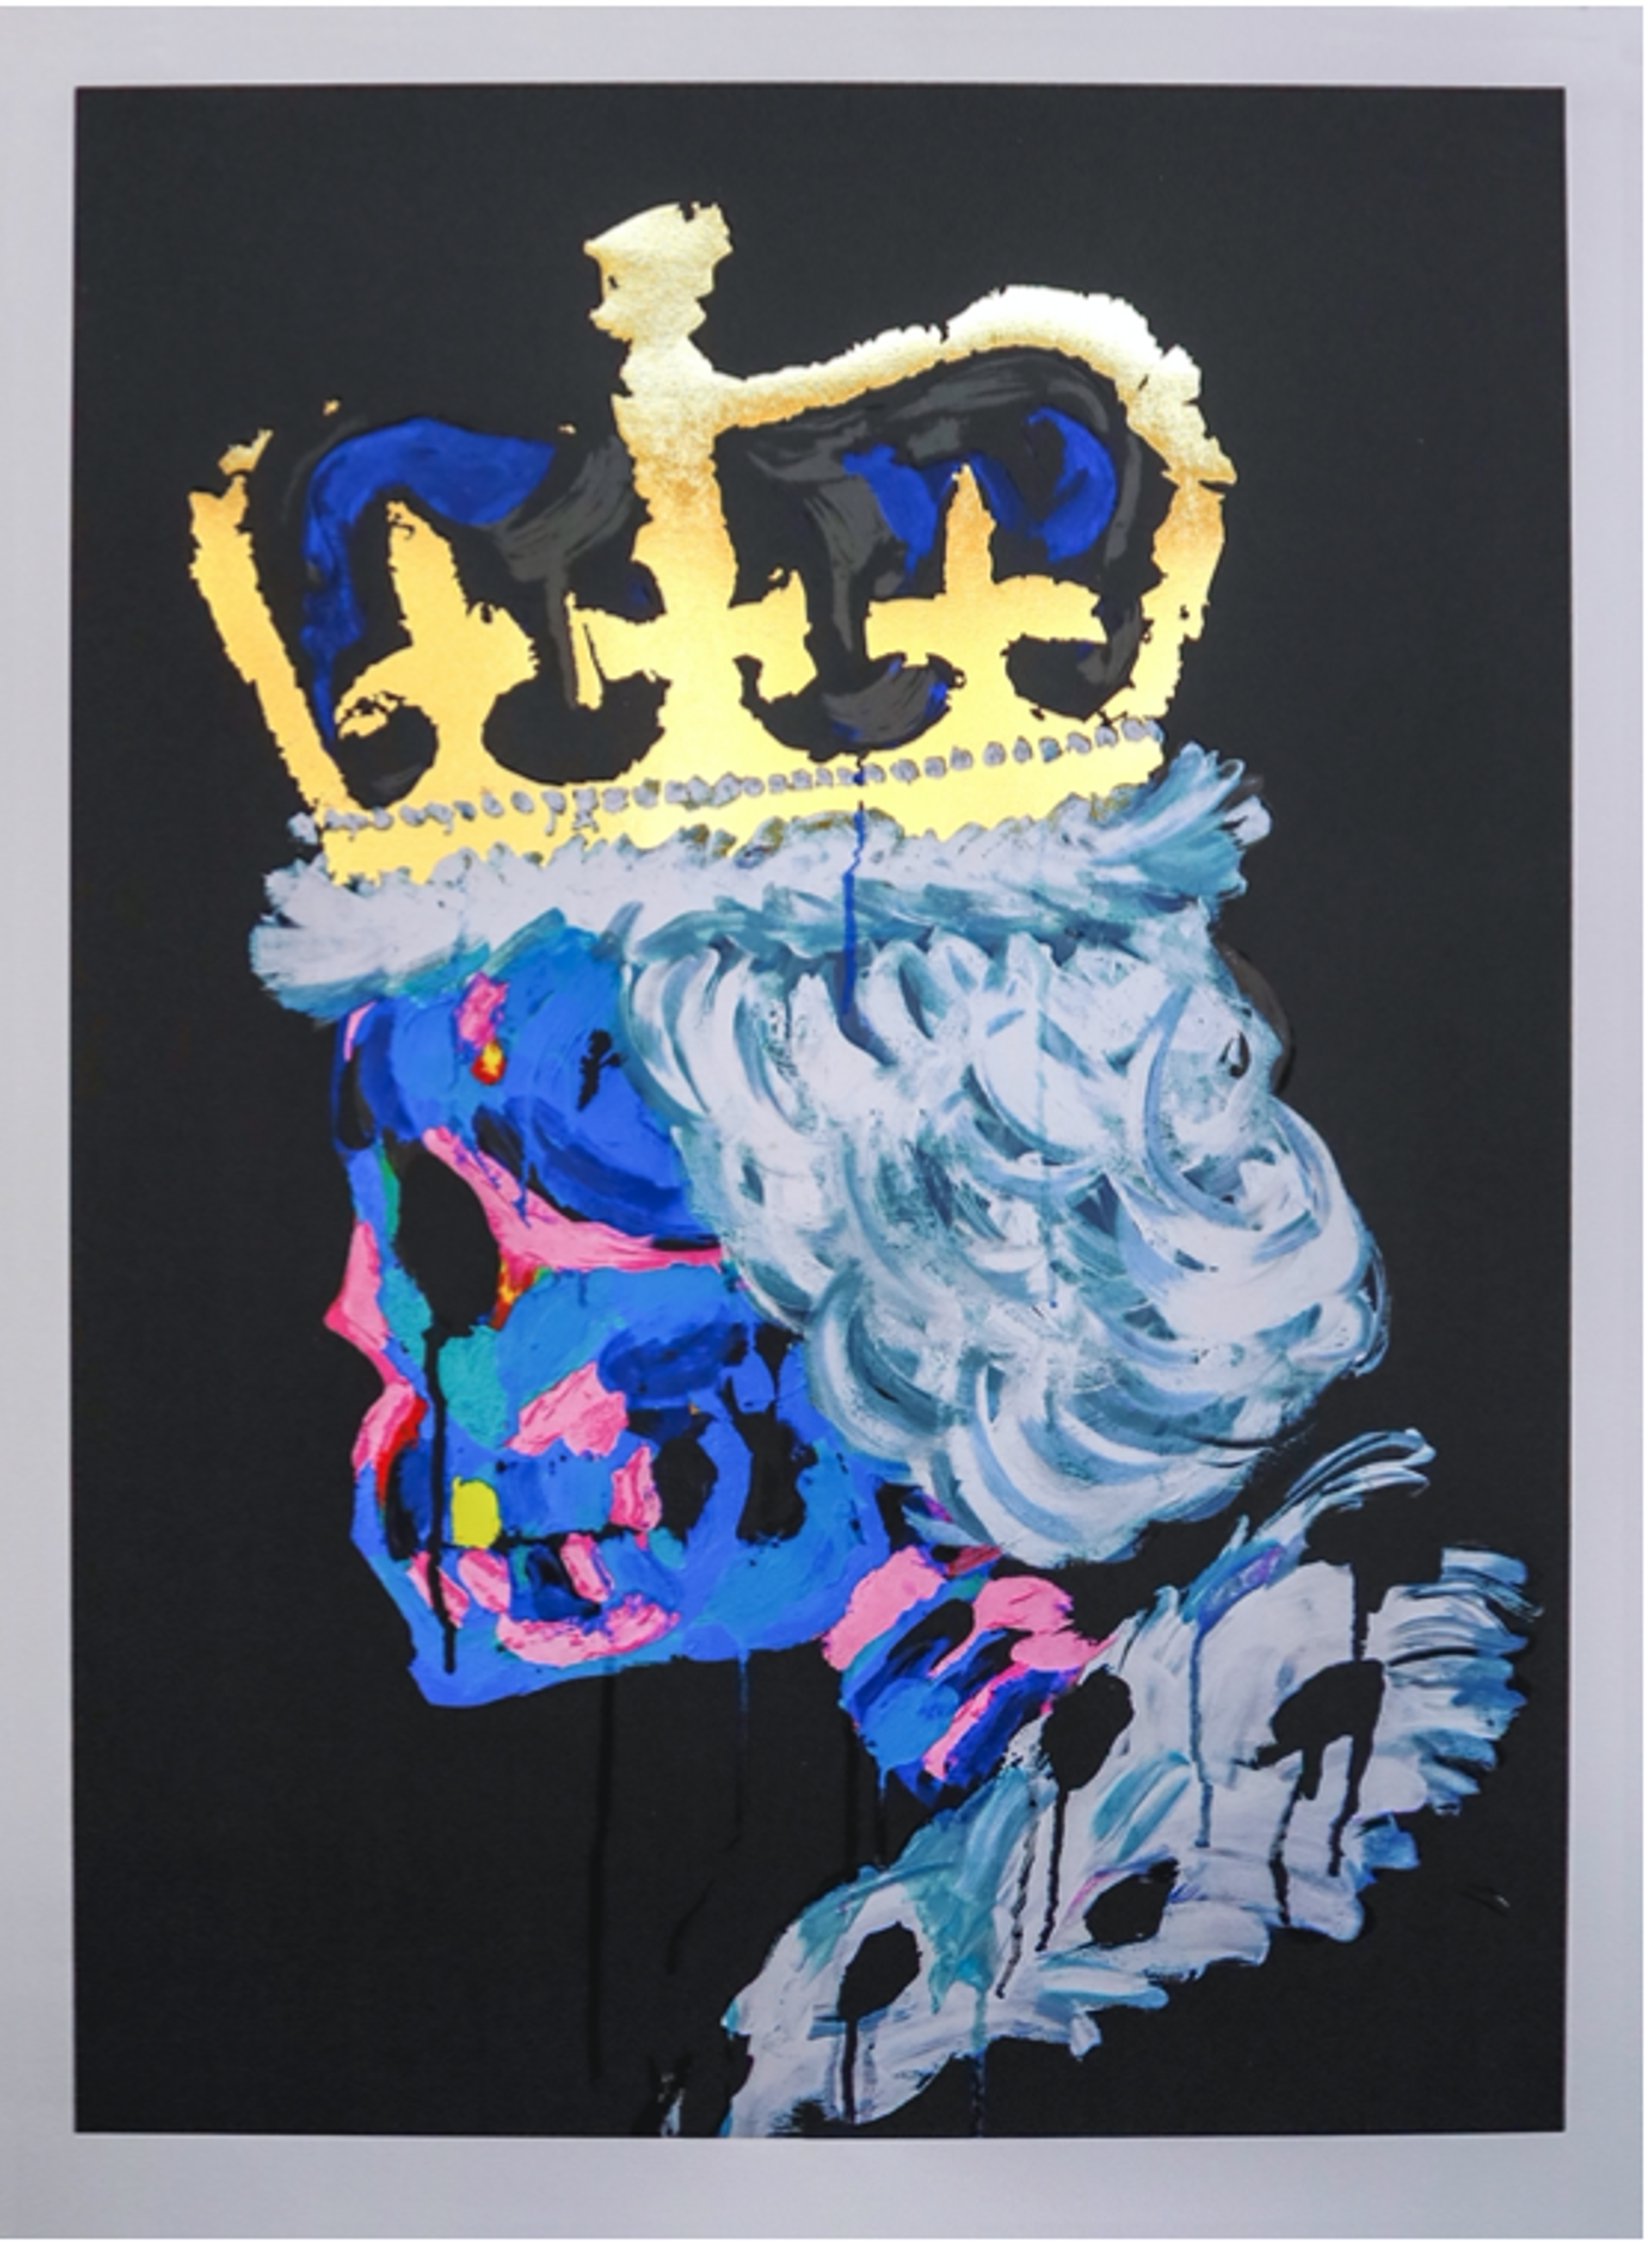 The Crown by Bradley Theodore